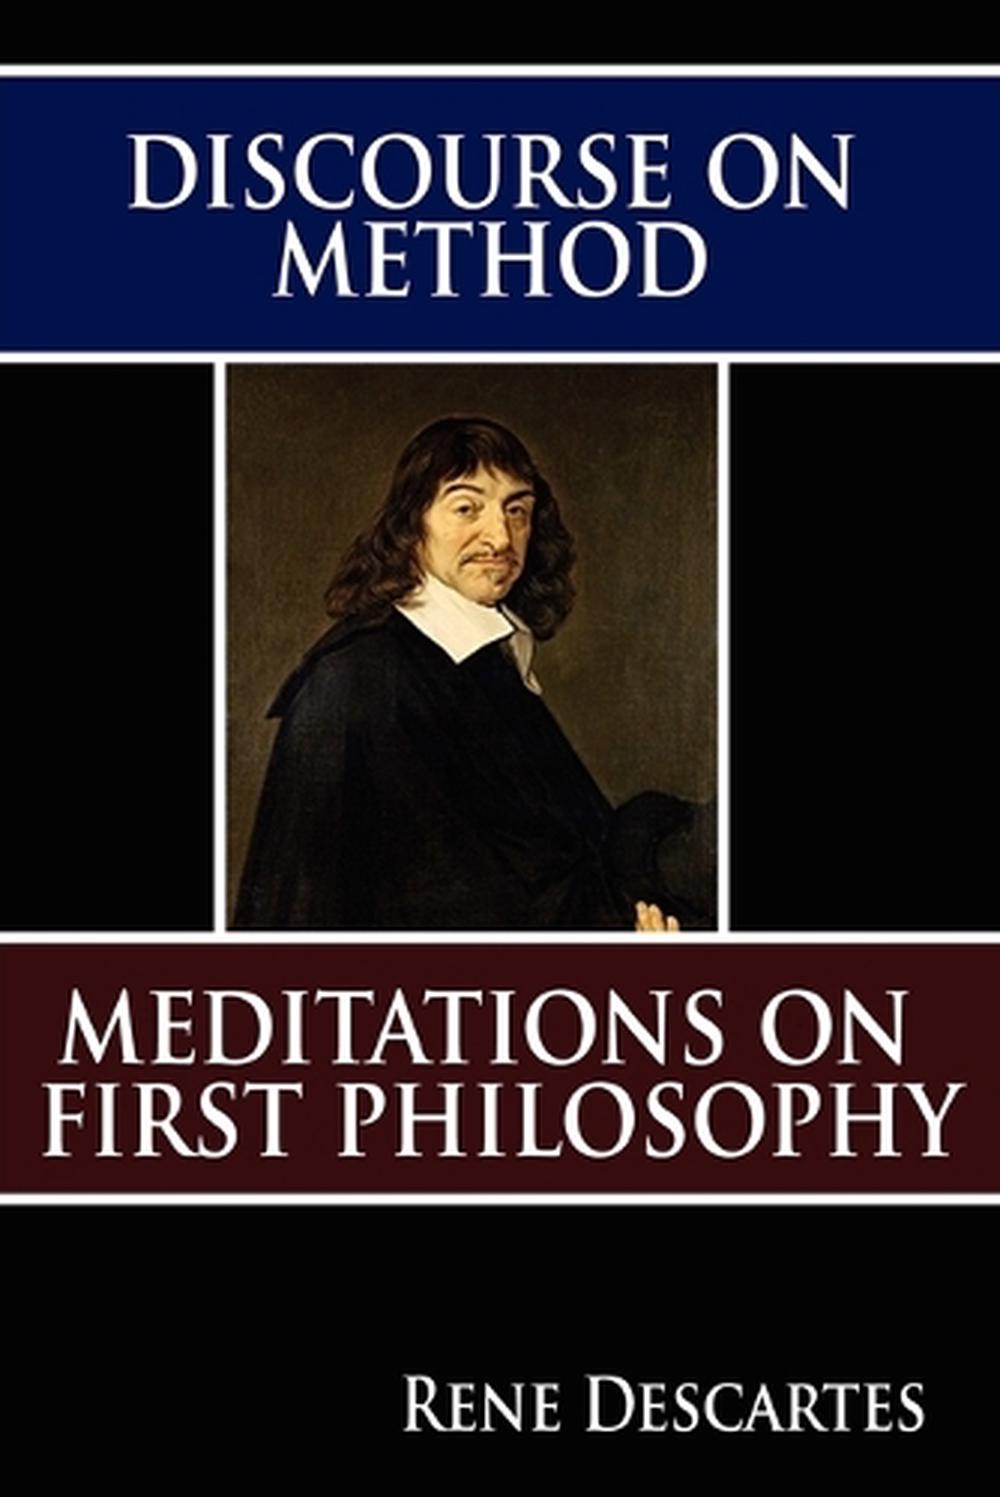 rené descartes discourse on method and meditations on first philosophy